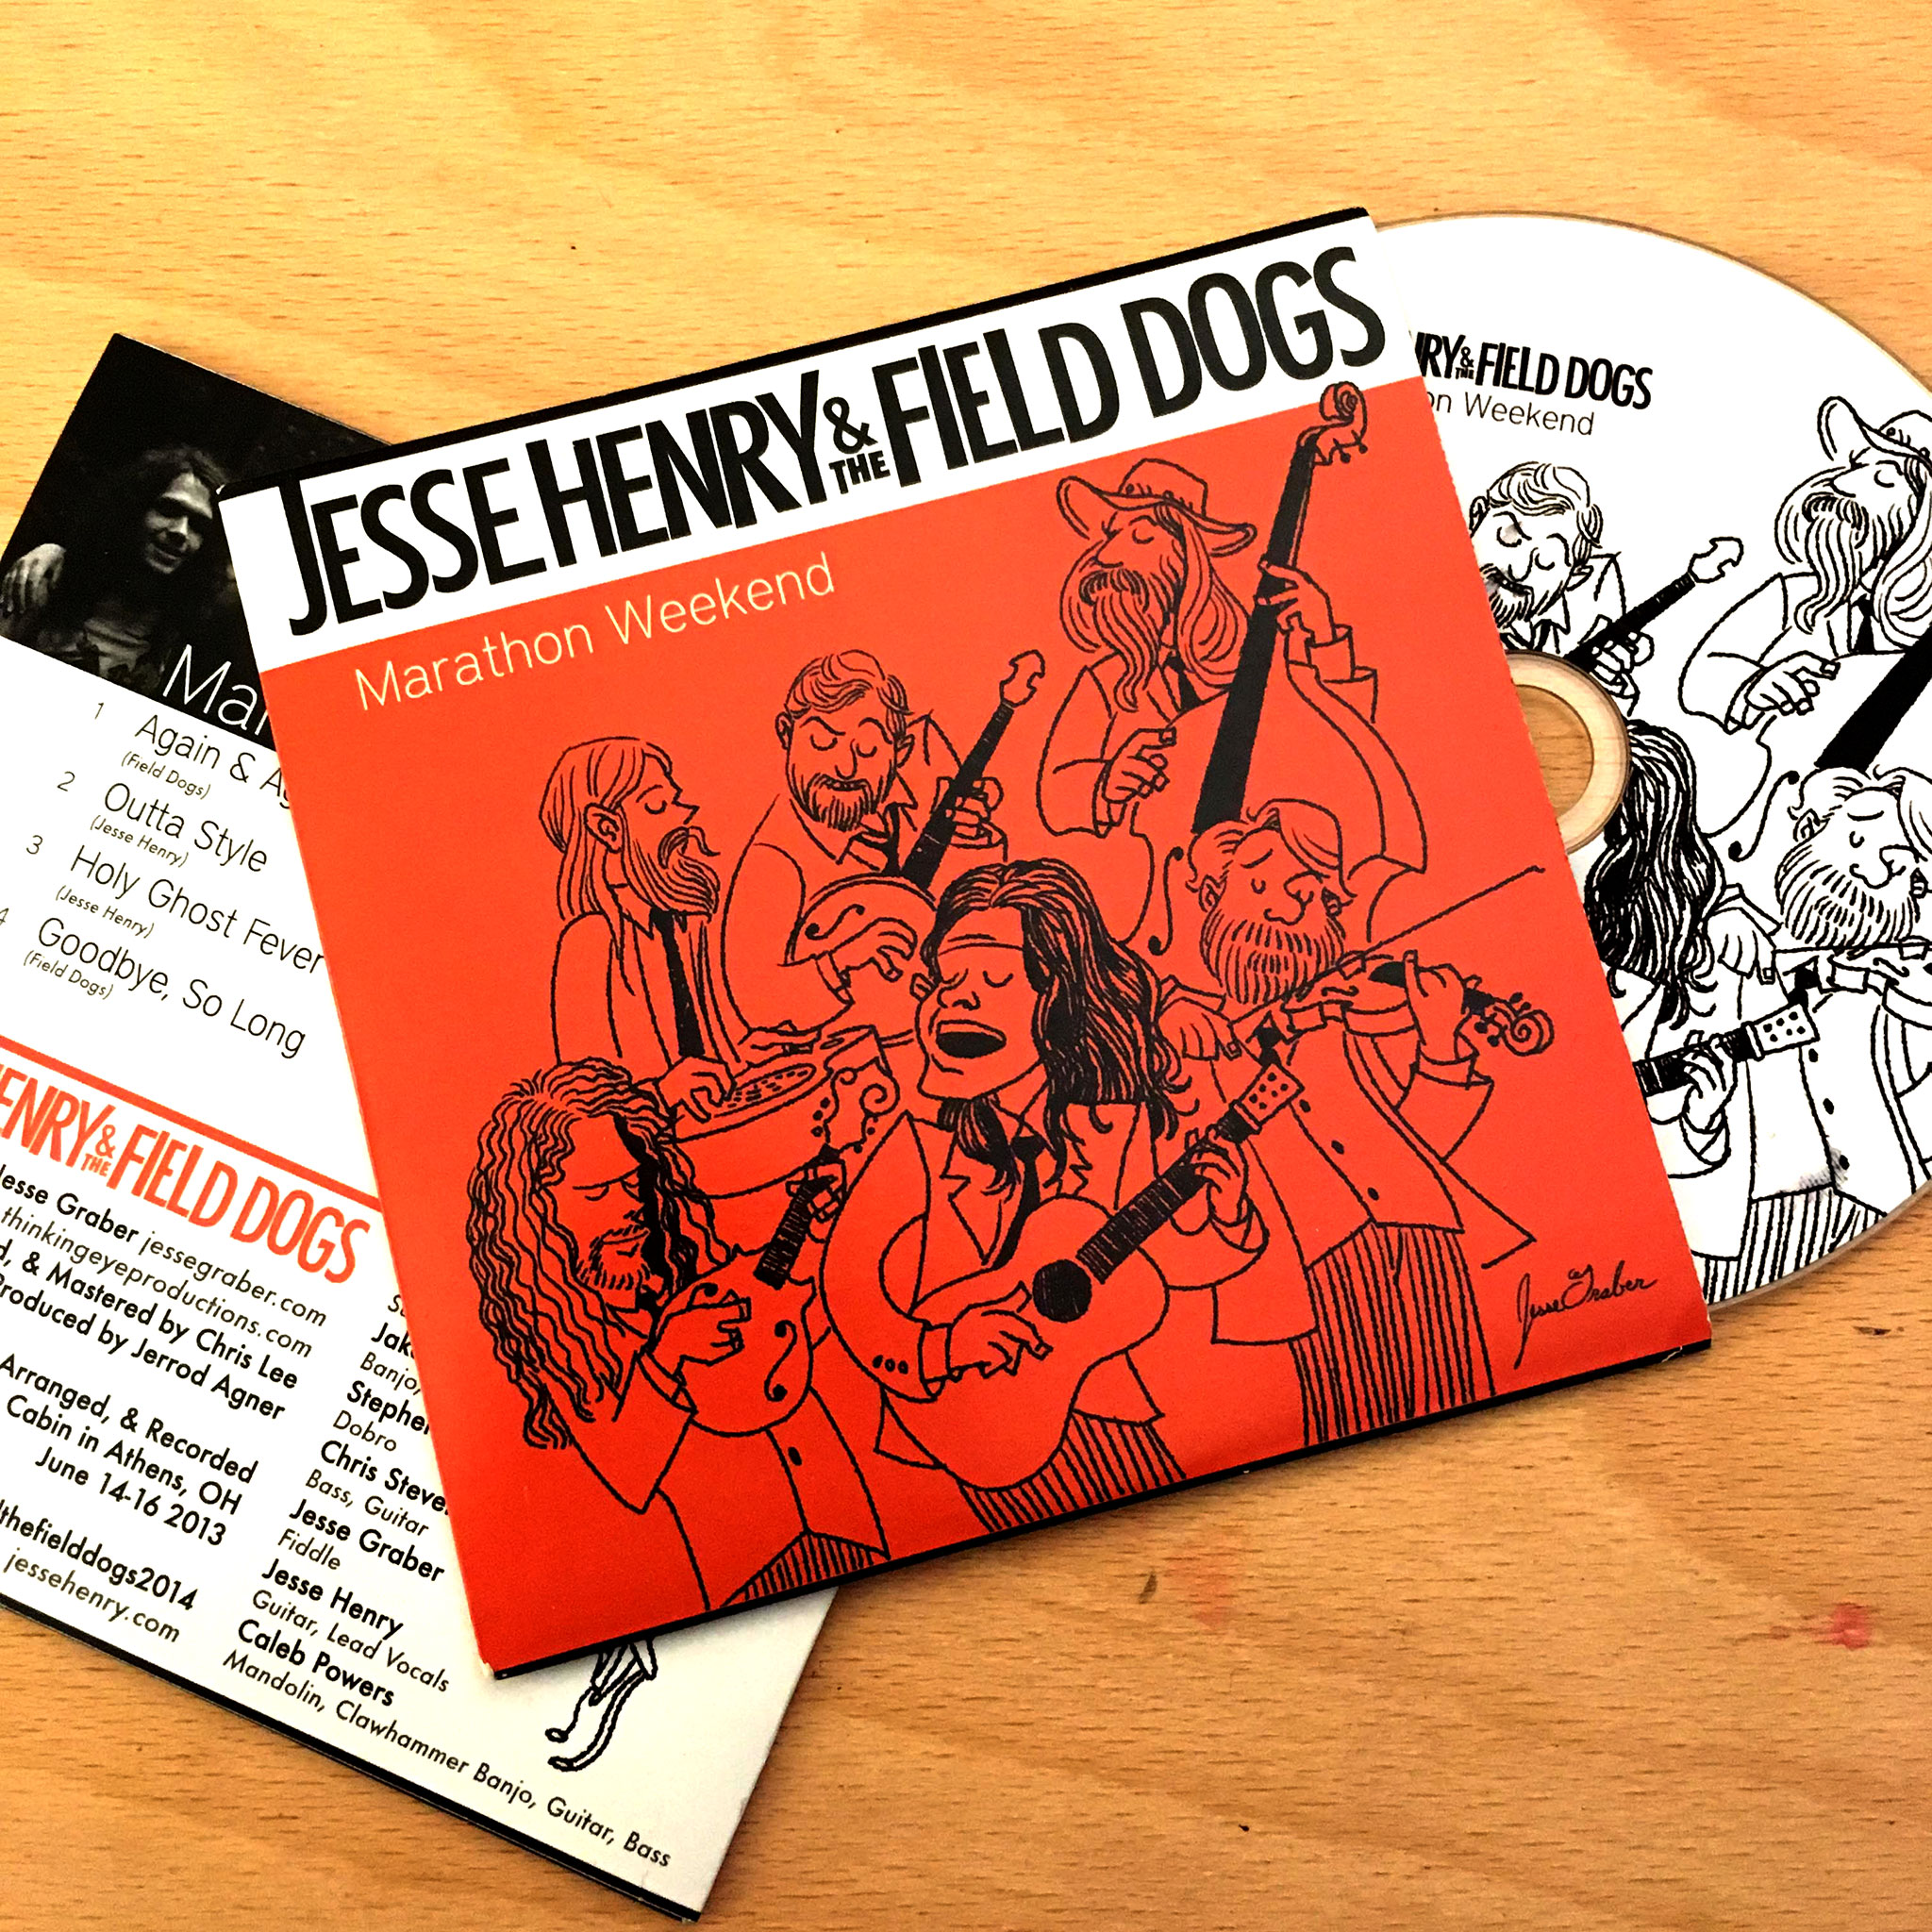  Jesse Henry and the Field Dogs 